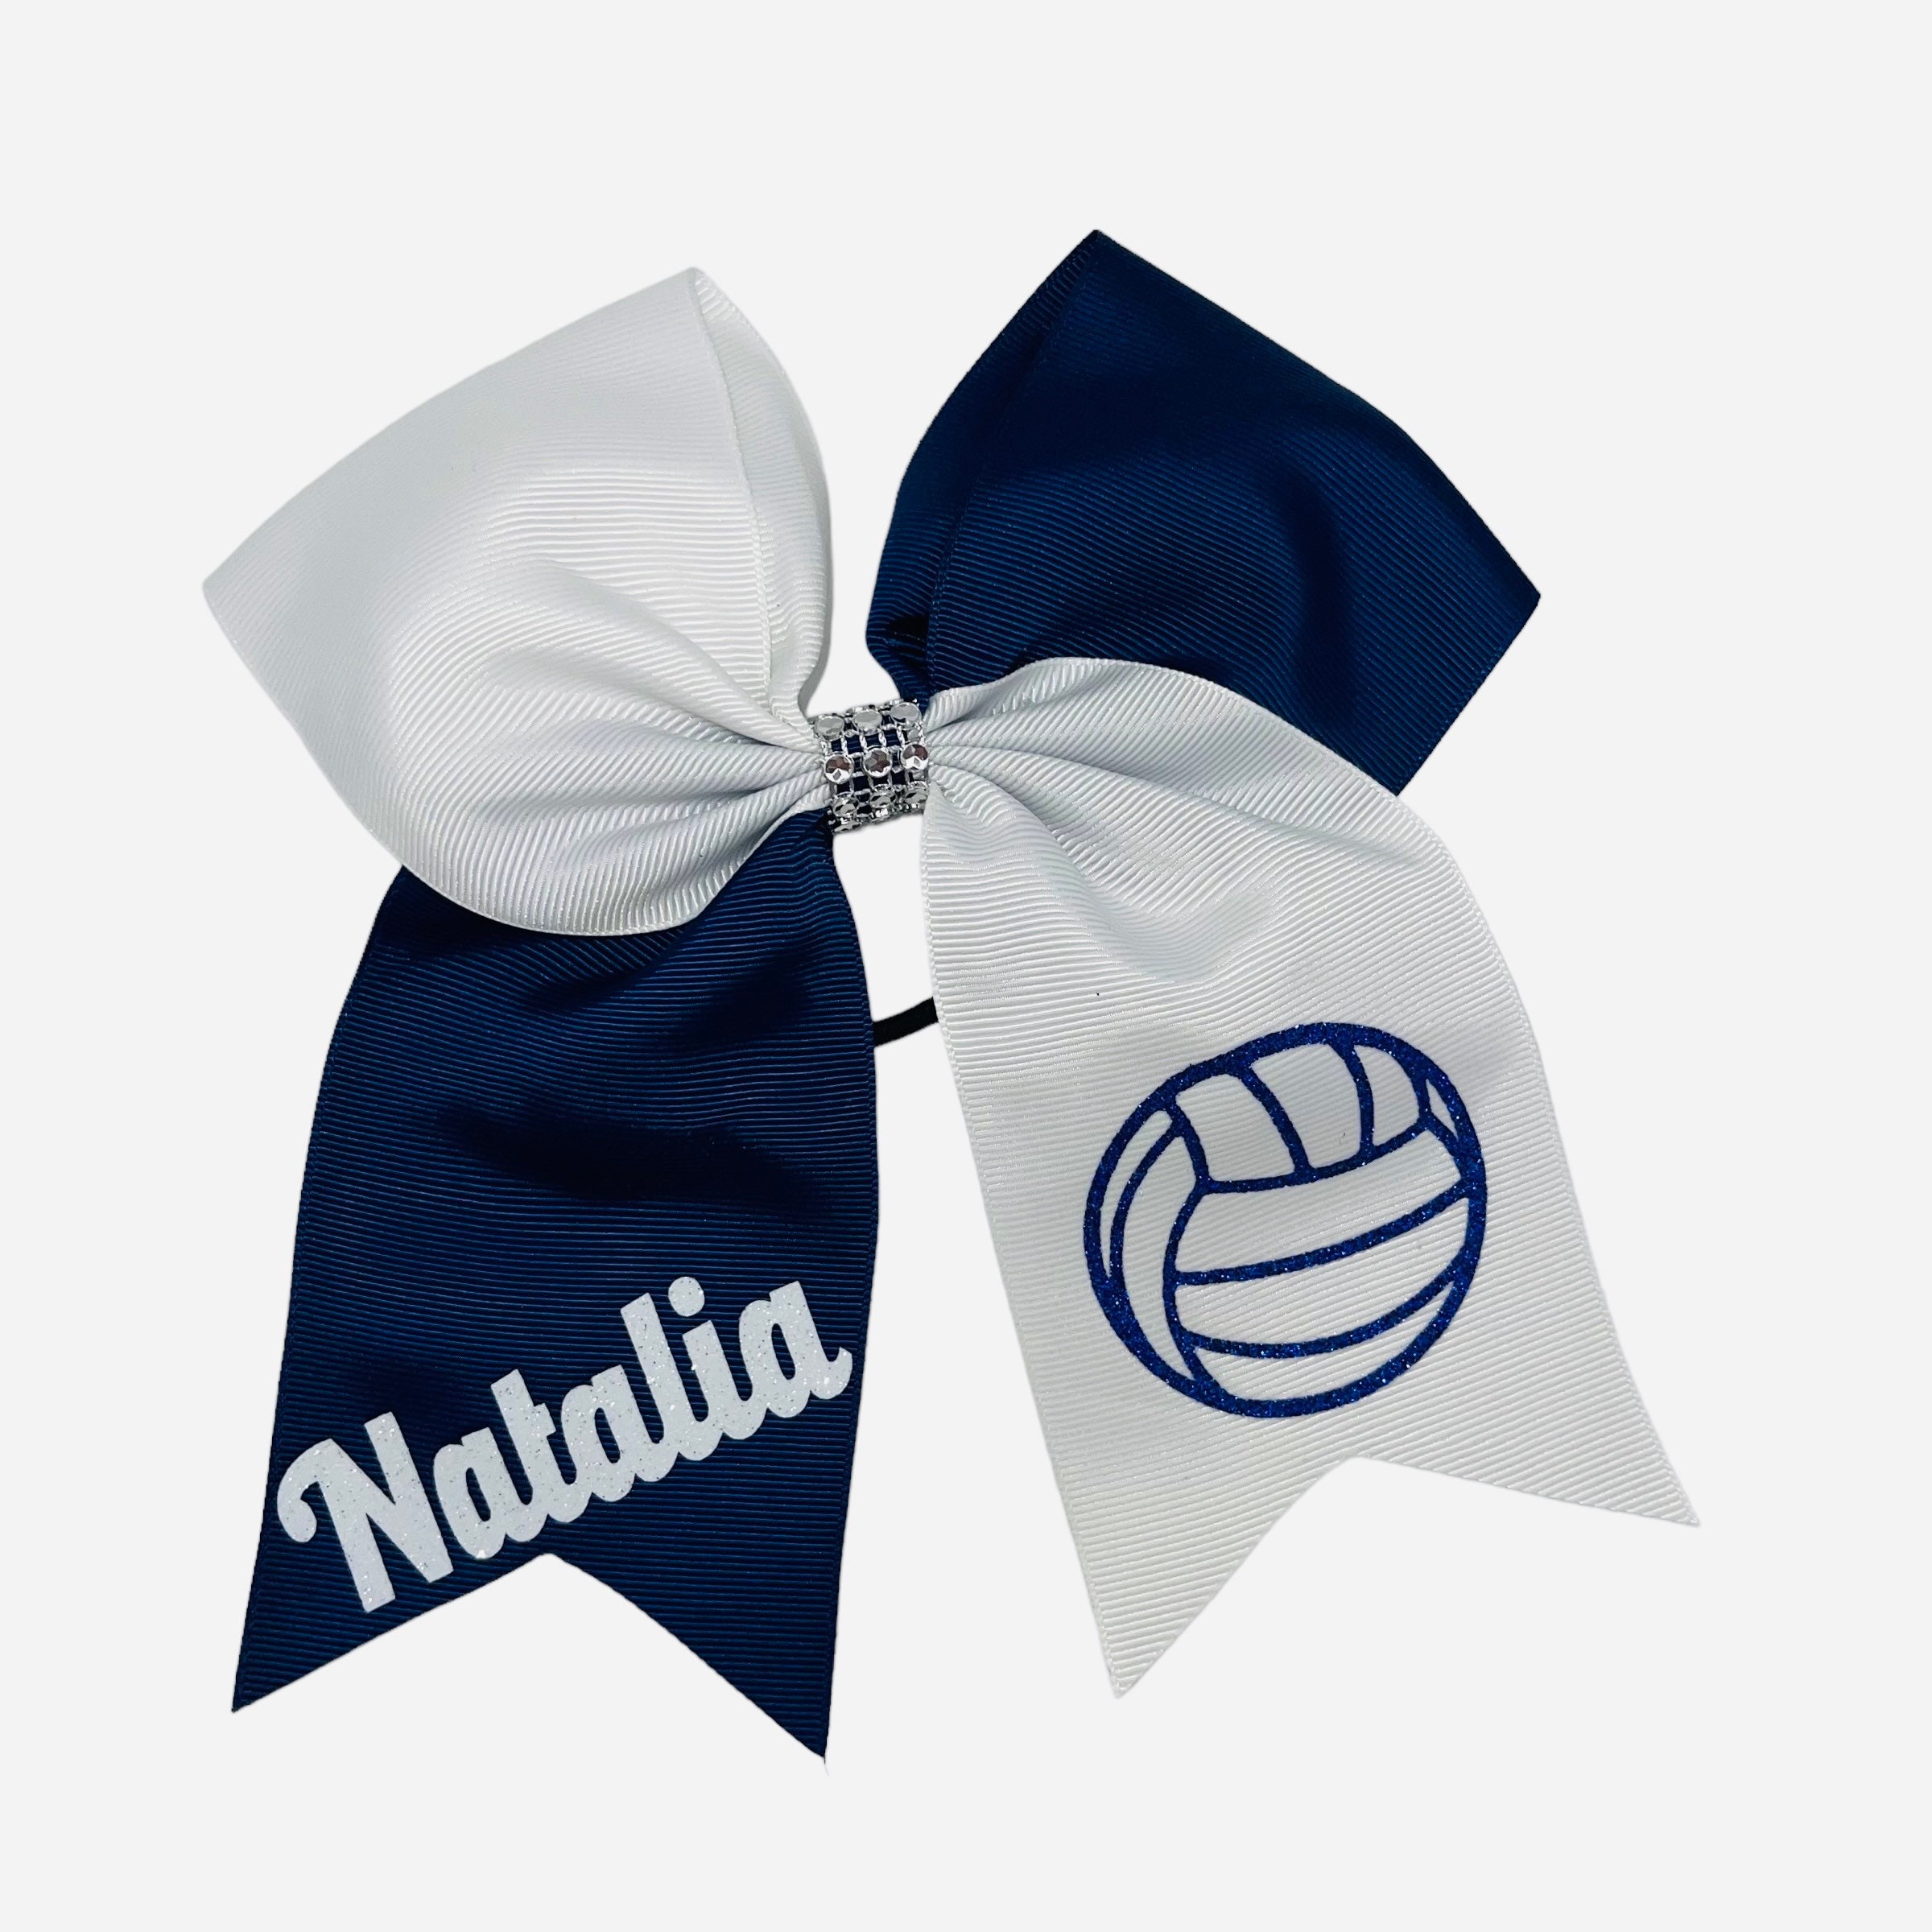 Volleyball Ribbon for Crafts - Q-YO 3/8-1.5 Volleyball/Softball/Soccer Grosgrain Ribbon for Cheer Bows, Team Uniform, Sewing and More (5yd 7/8